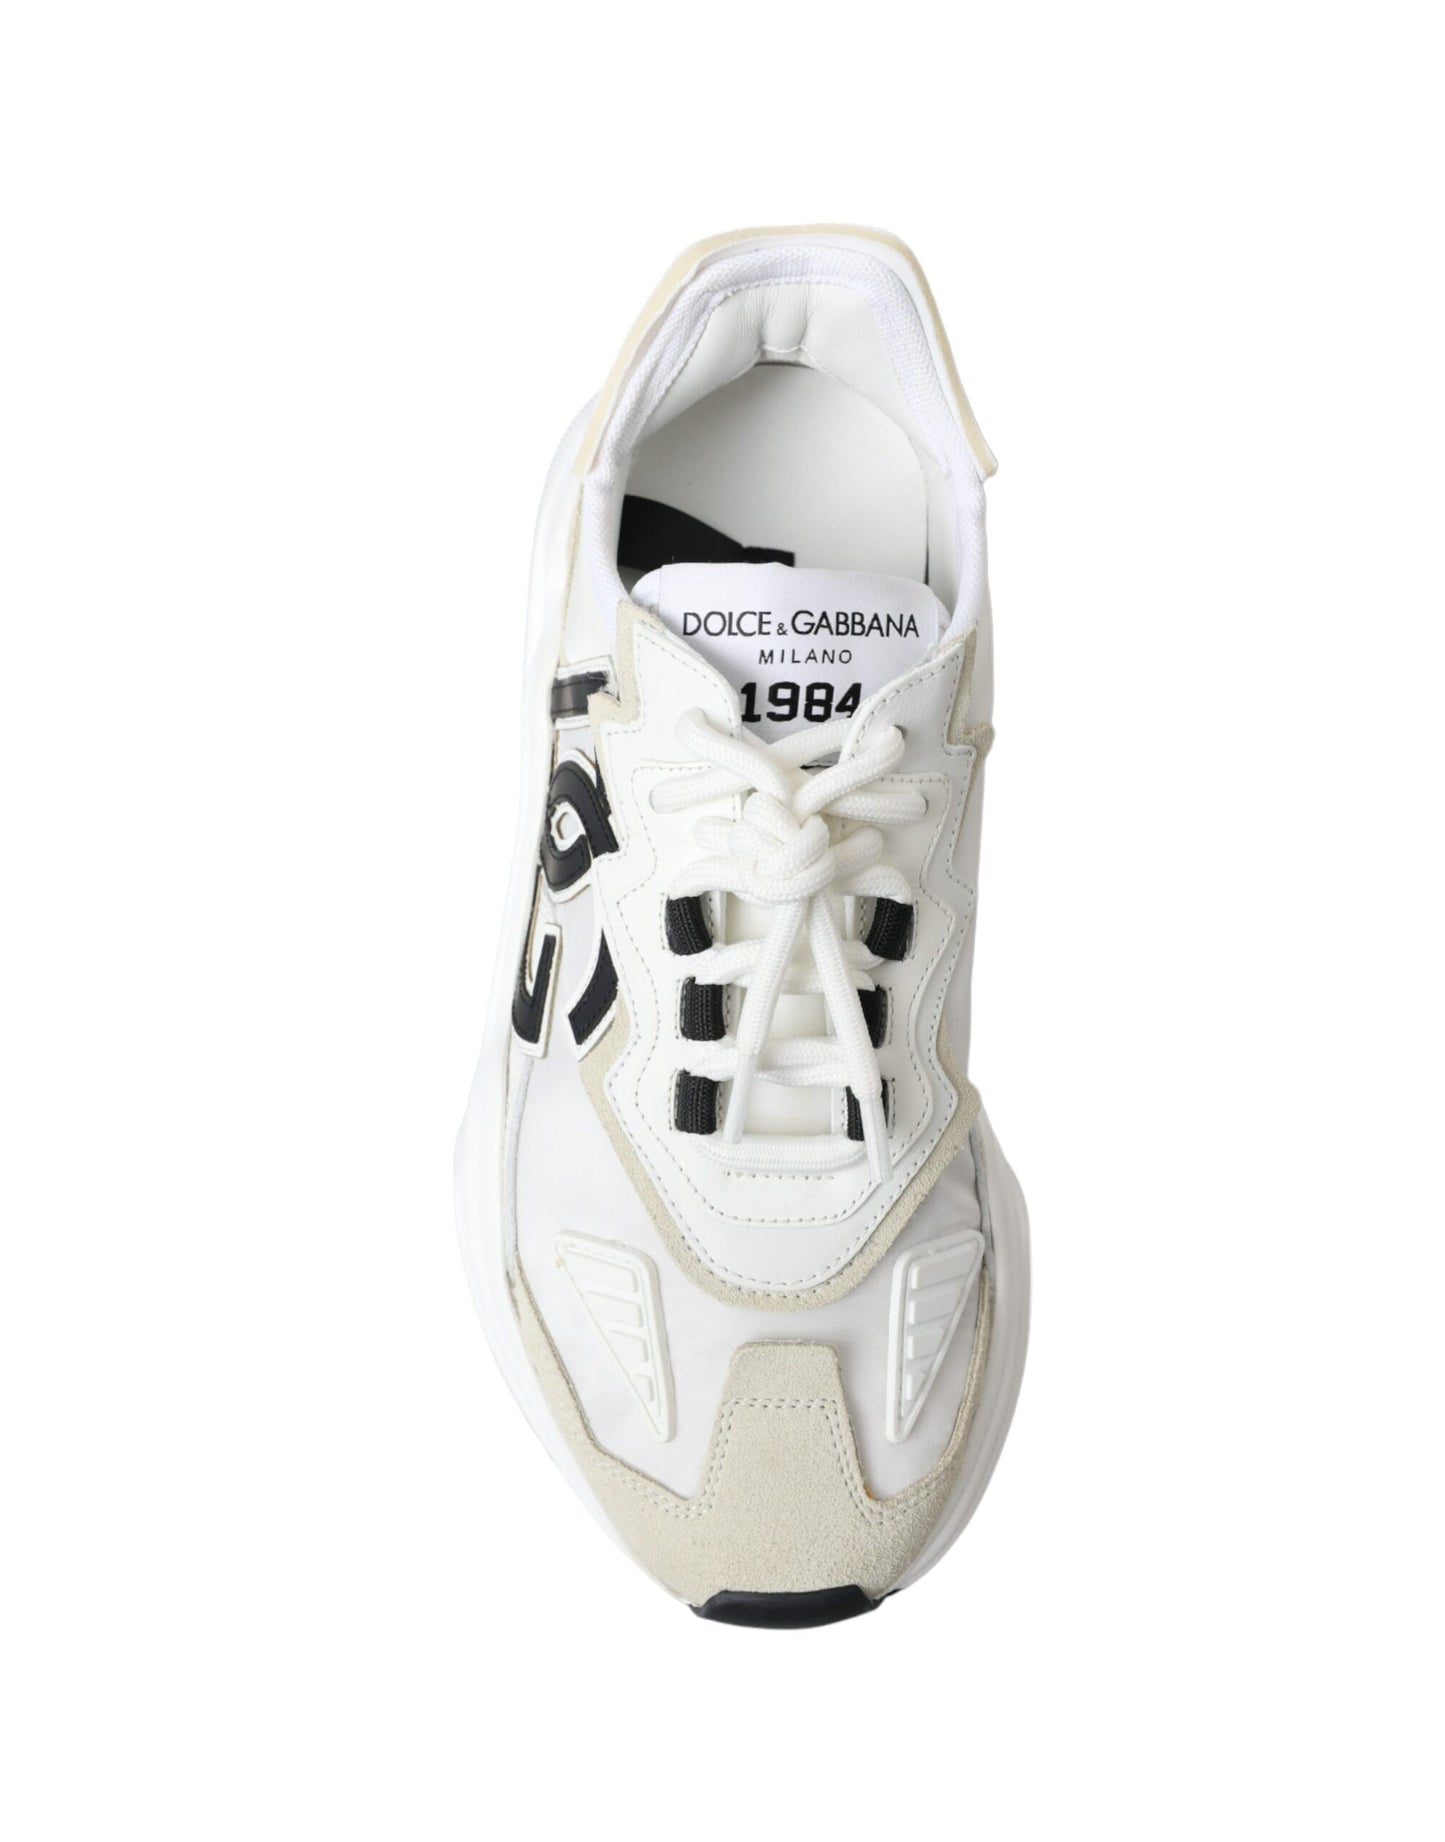 Daymaster Chic White Nylon Sneakers